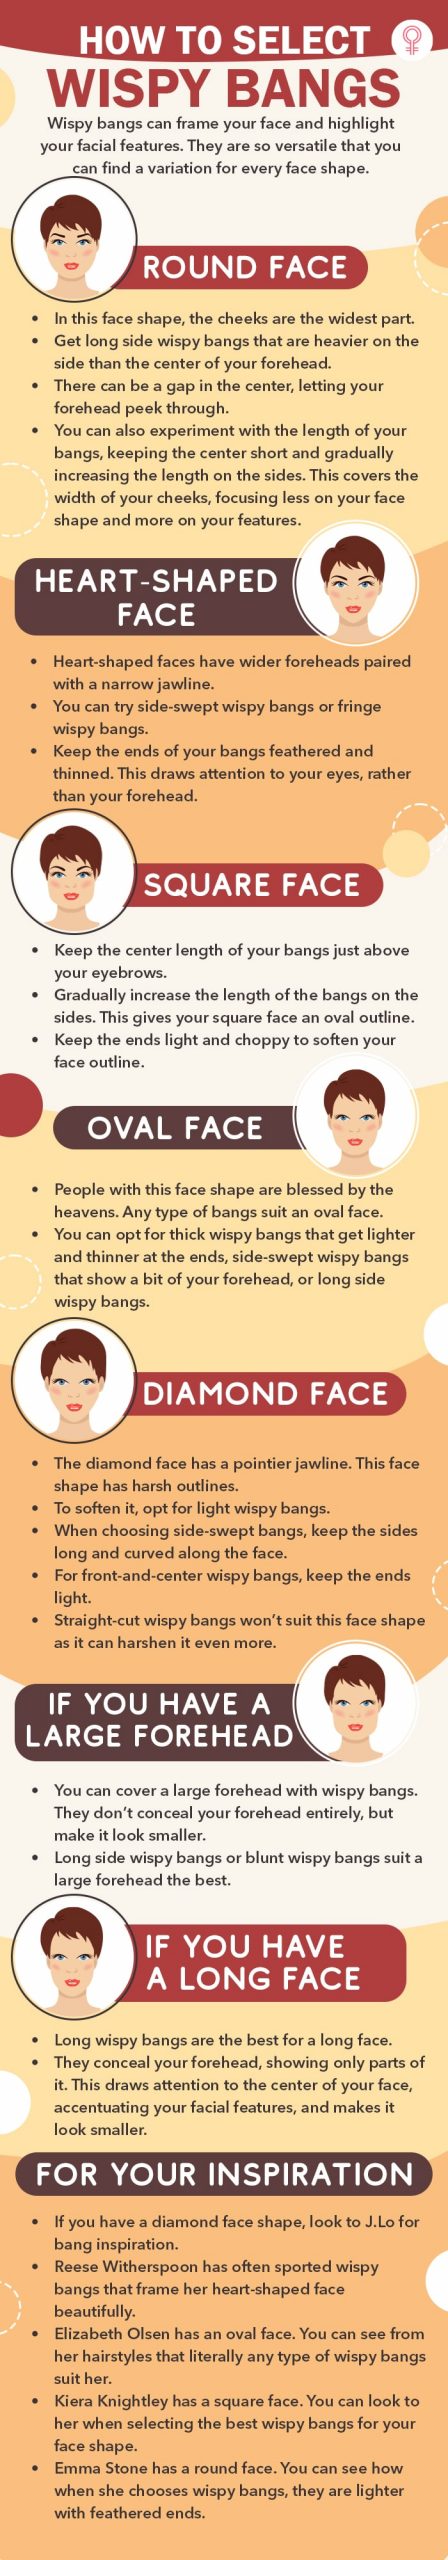 how to select wispy bangs for all face types [infographic]